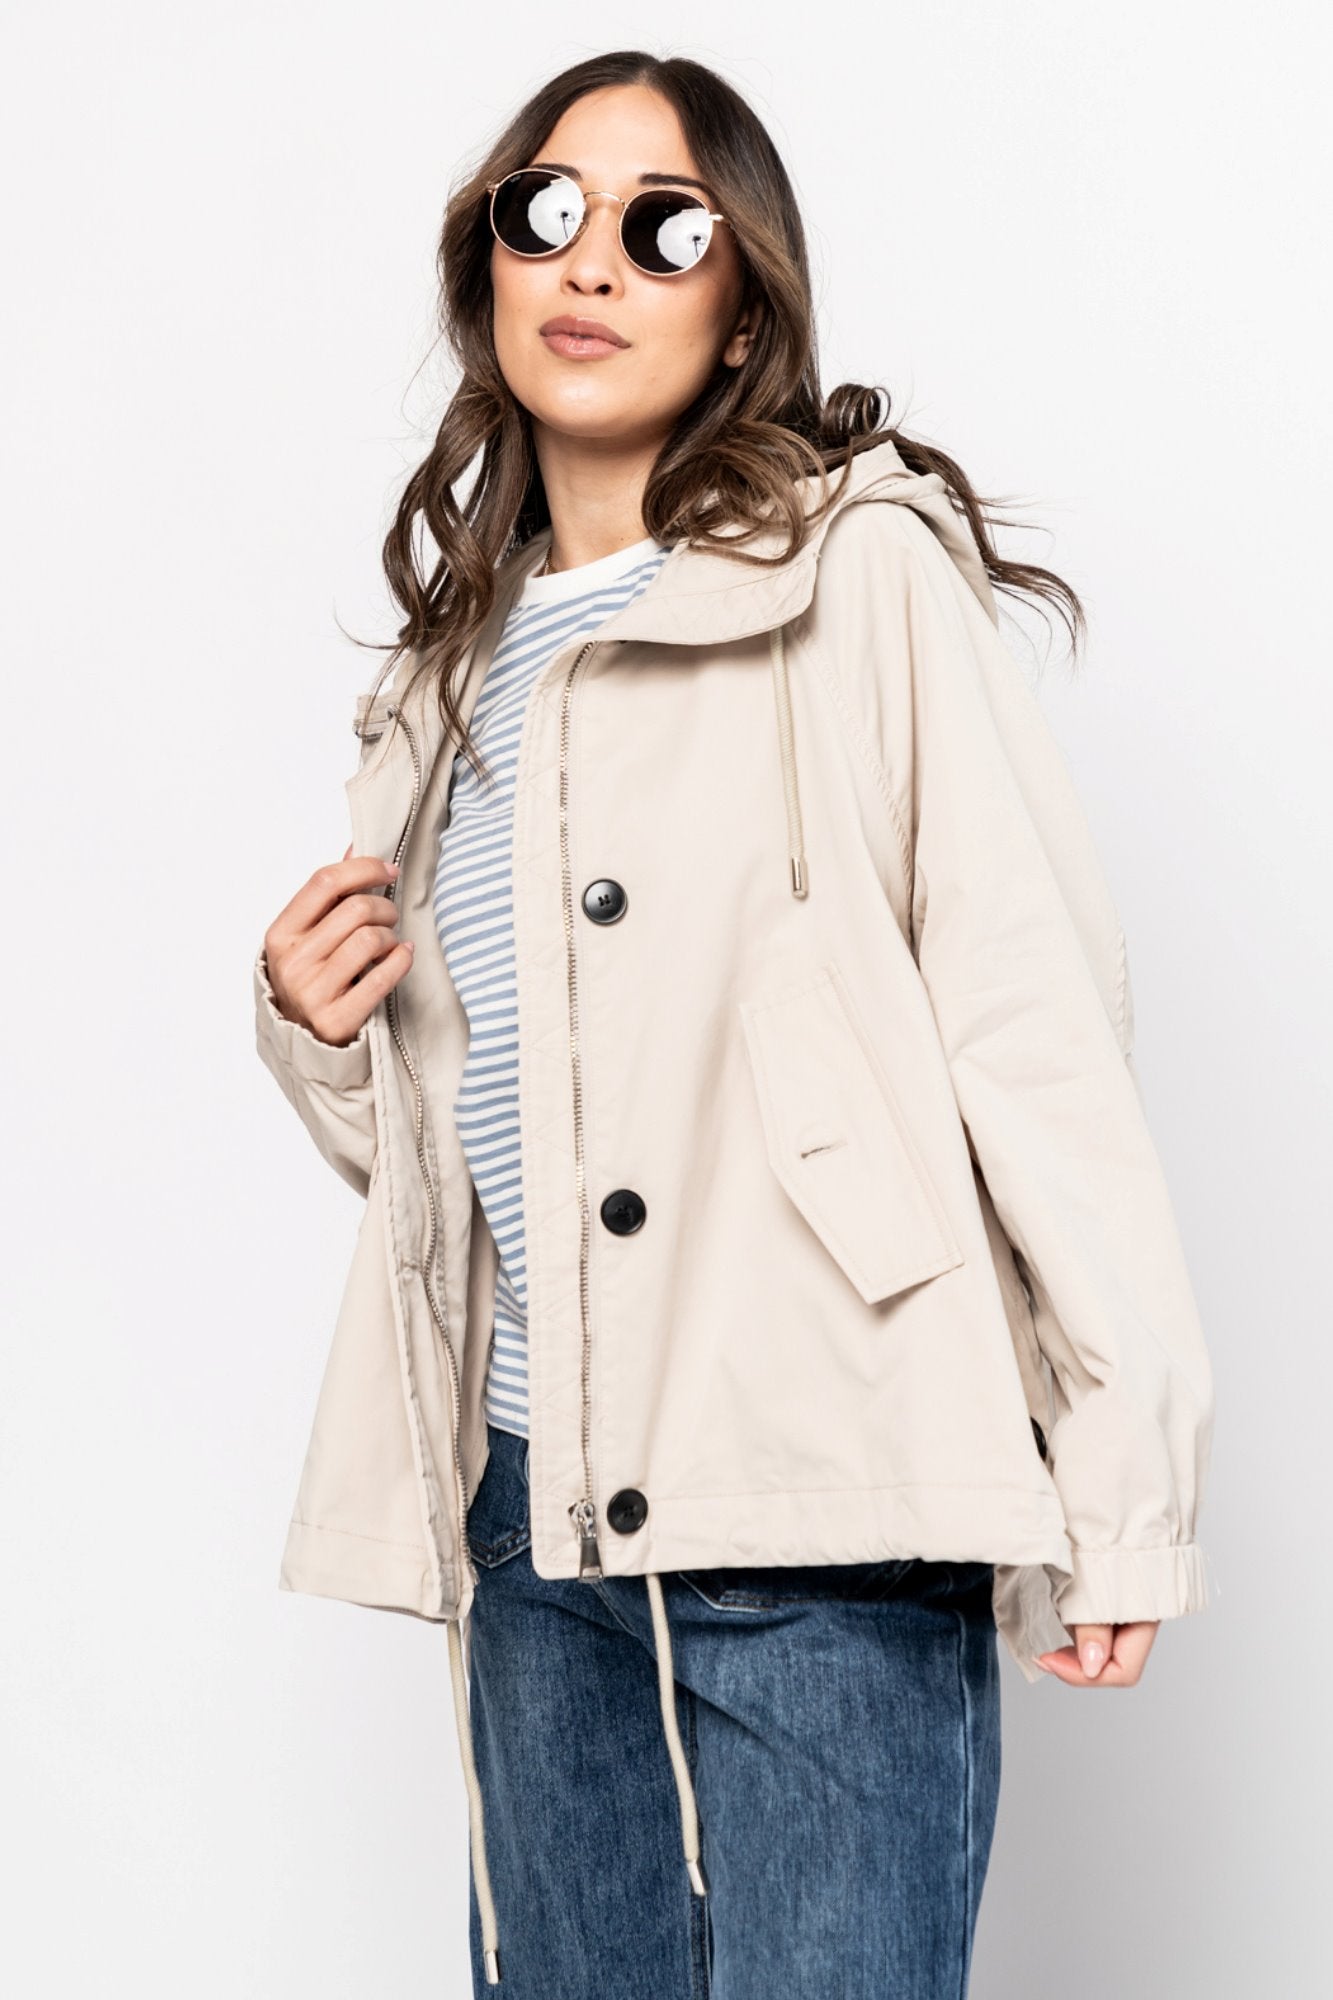 Anderson Jacket in Sand Clothing Holley Girl 